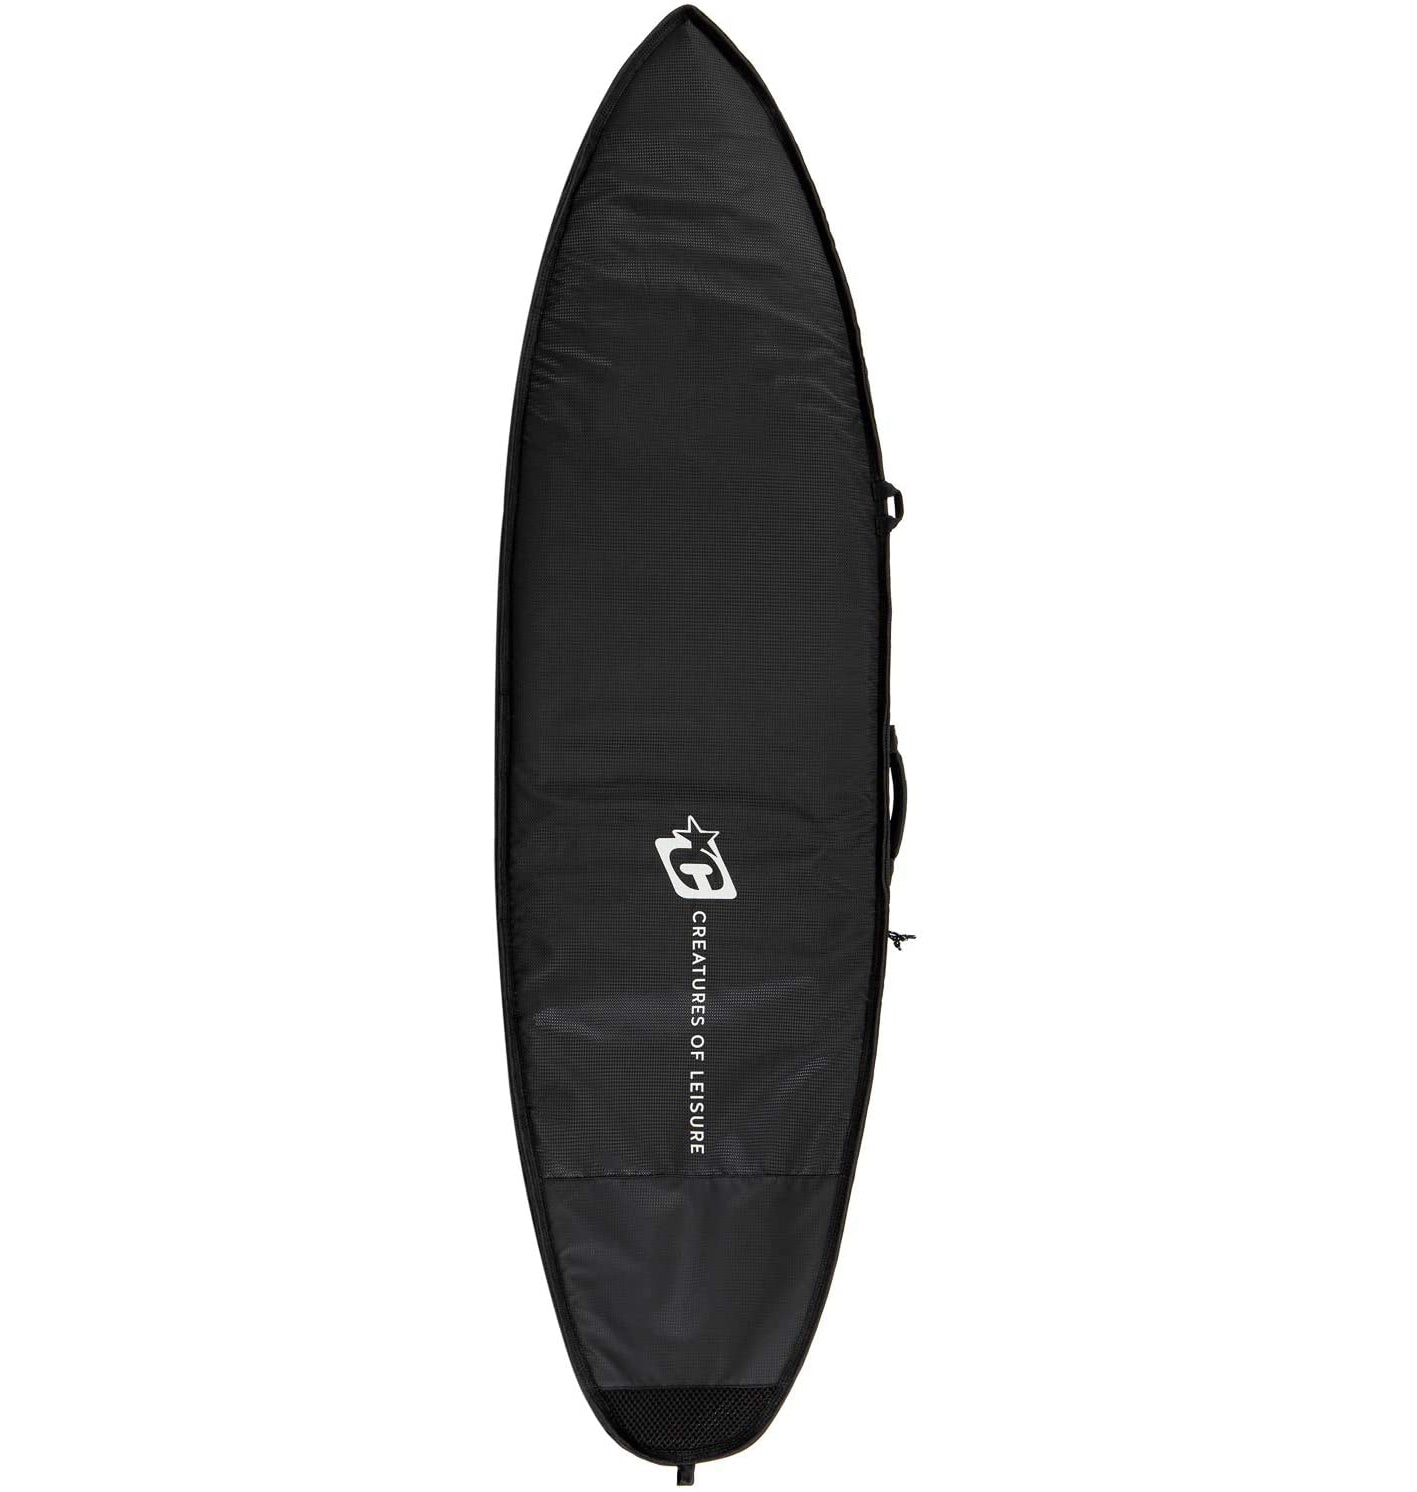 Creatures of Leisure Day Use DT2.0 Shortboard Boardbag Black-Silver 6ft0in